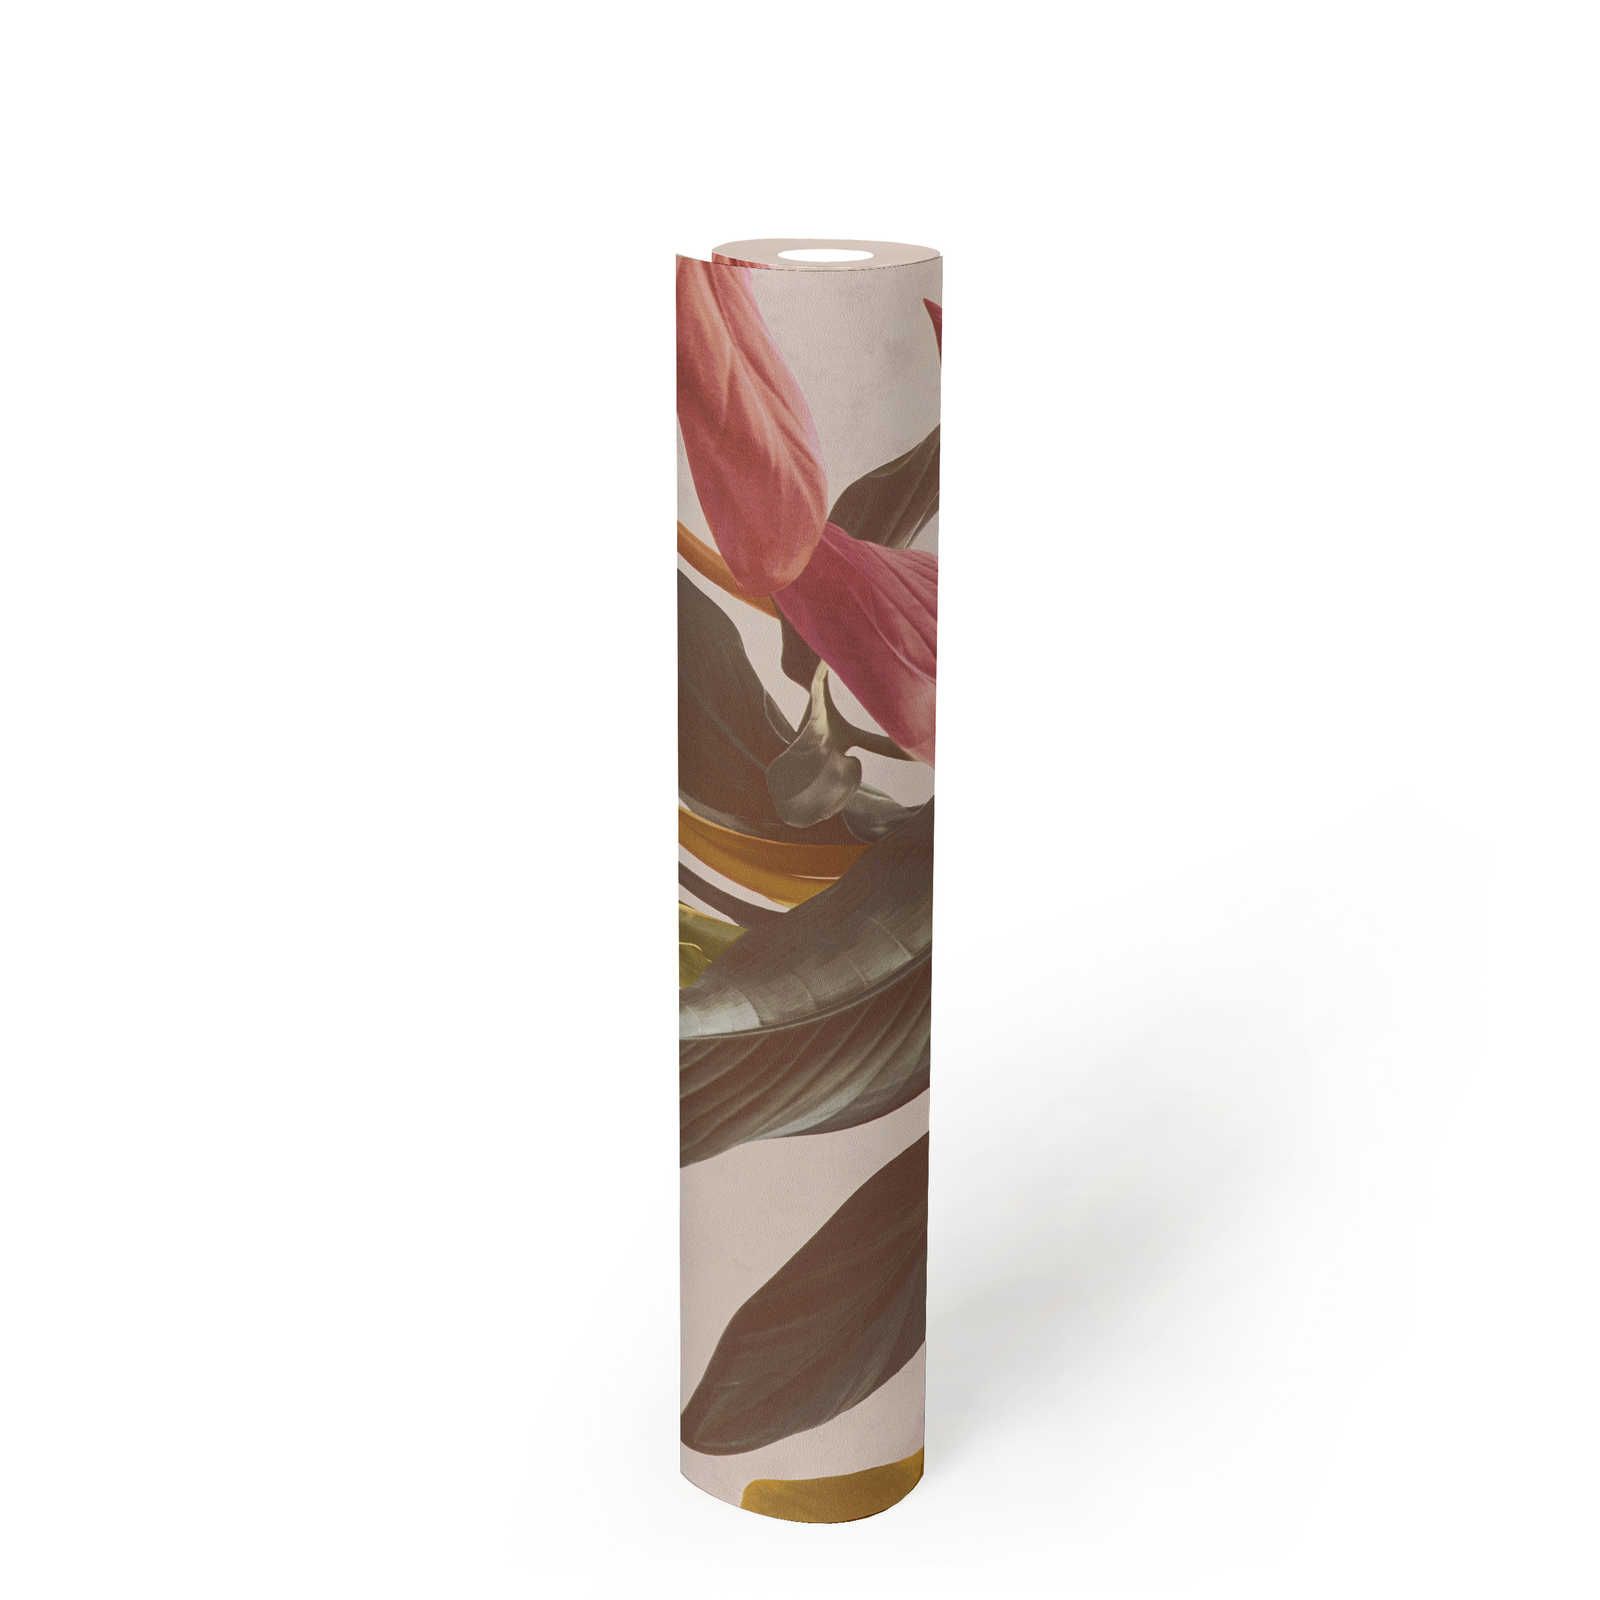             Colorful leaves wallpaper with satin sheen - brown, orange, red
        